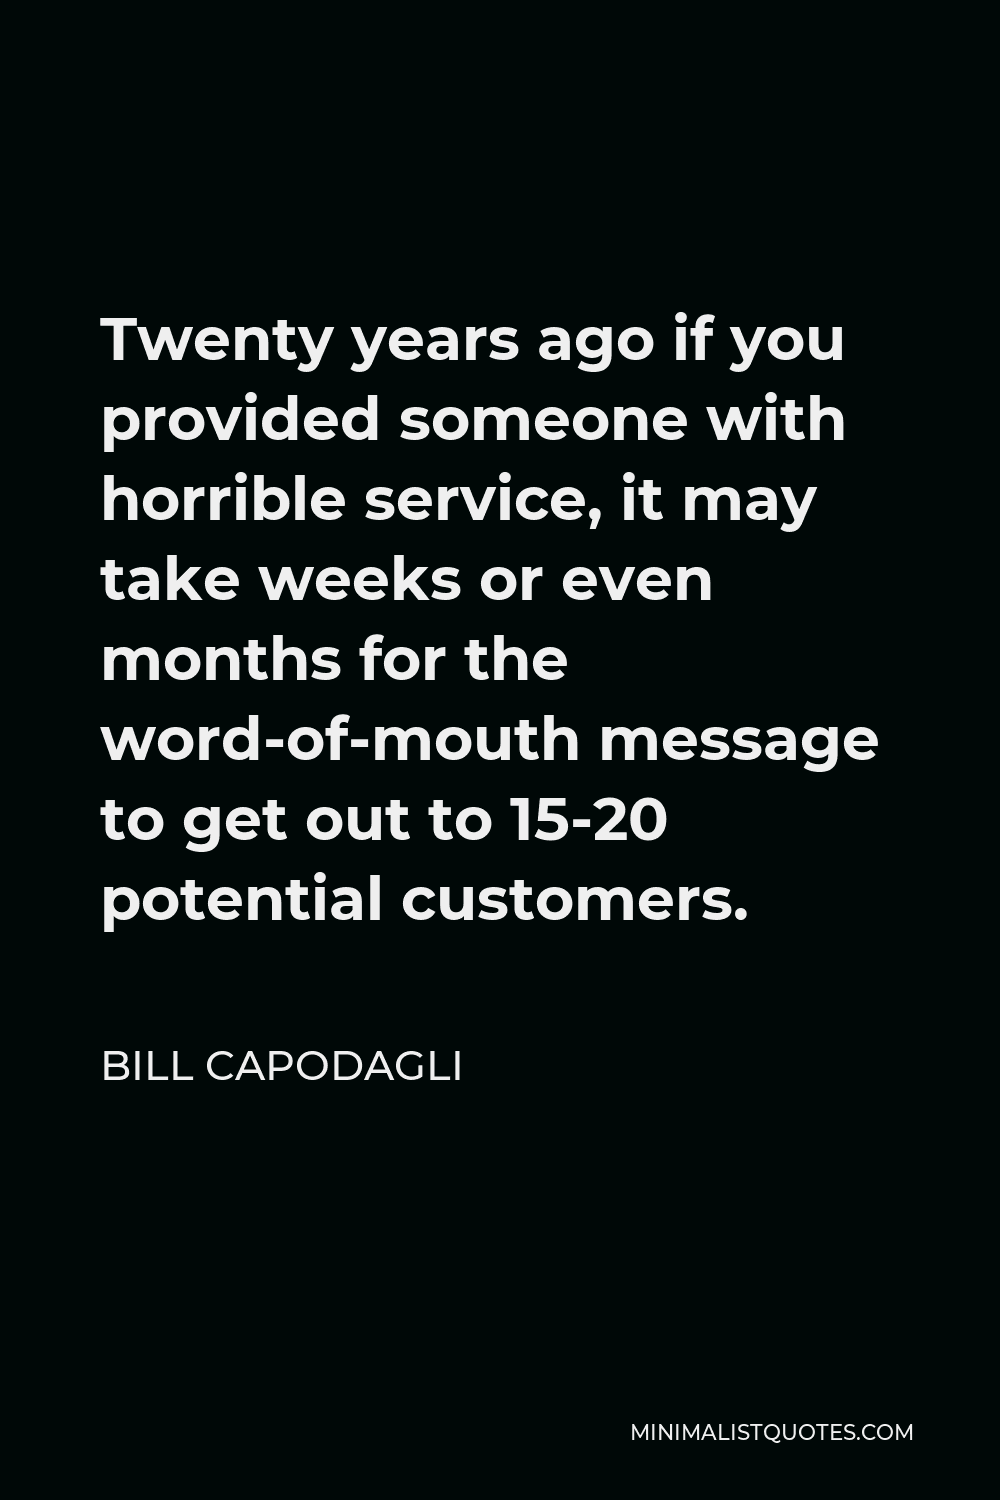 Bill Capodagli Quote - Twenty years ago if you provided someone with horrible service, it may take weeks or even months for the word-of-mouth message to get out to 15-20 potential customers.